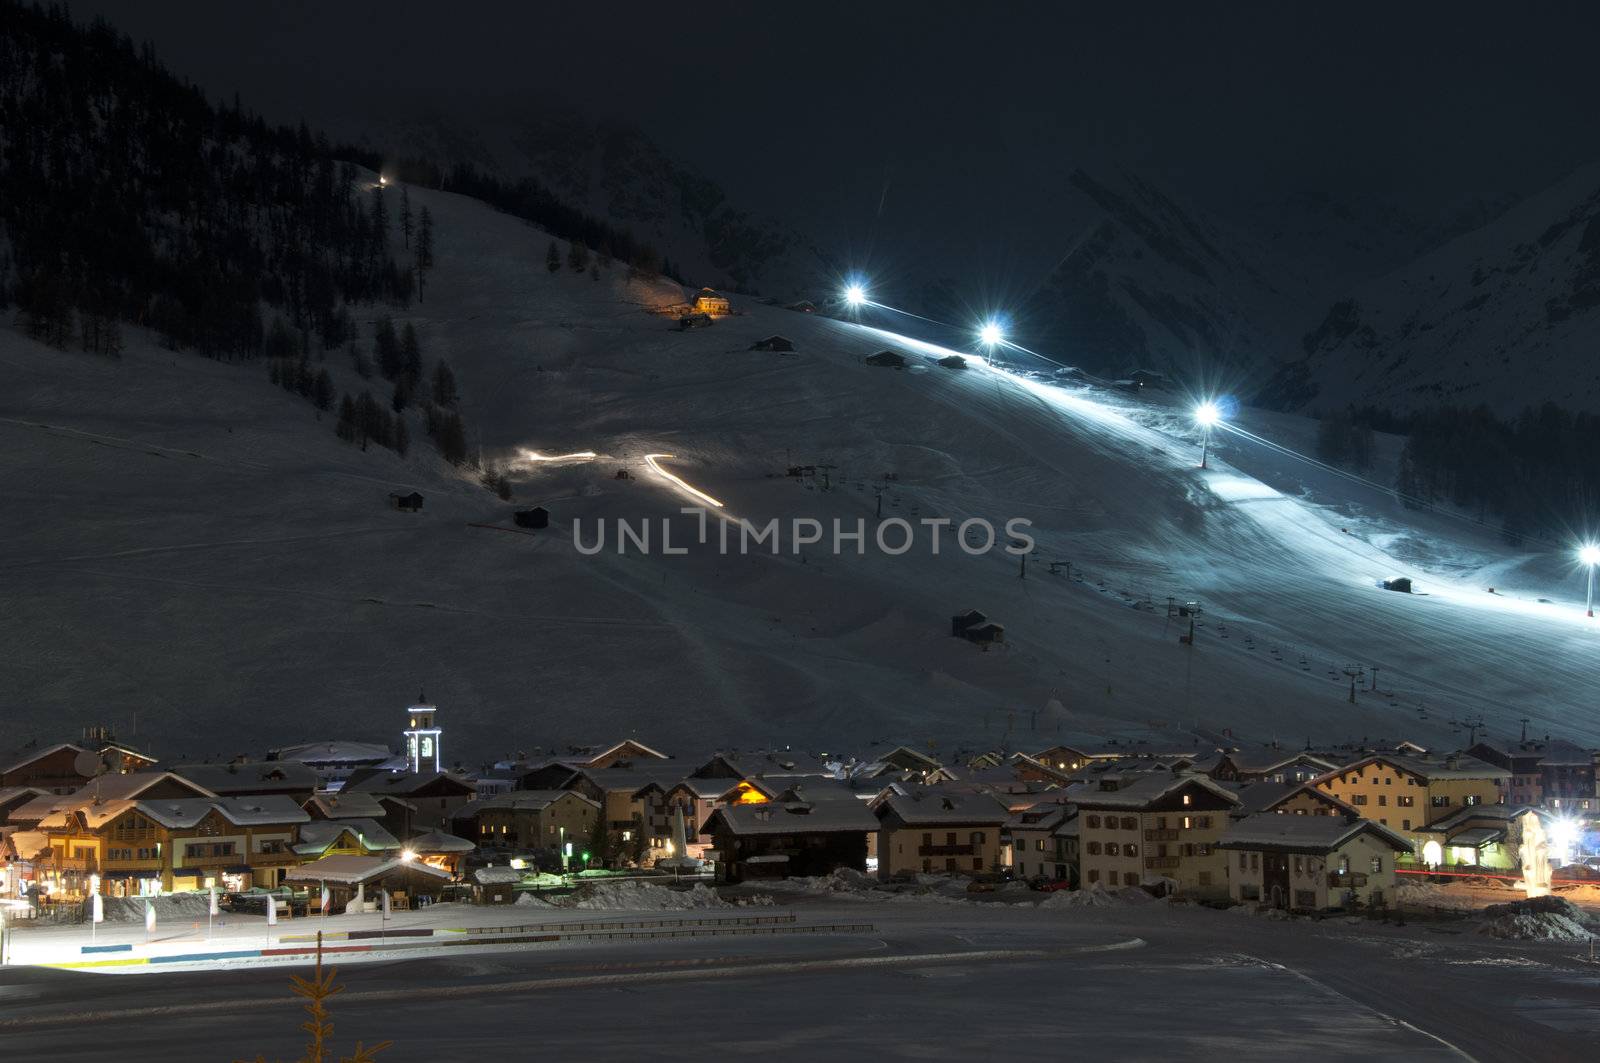 Ski village at night with slope lights, cross-country ski run, buildings, ice monument - shot in Livigno, Italian Alps